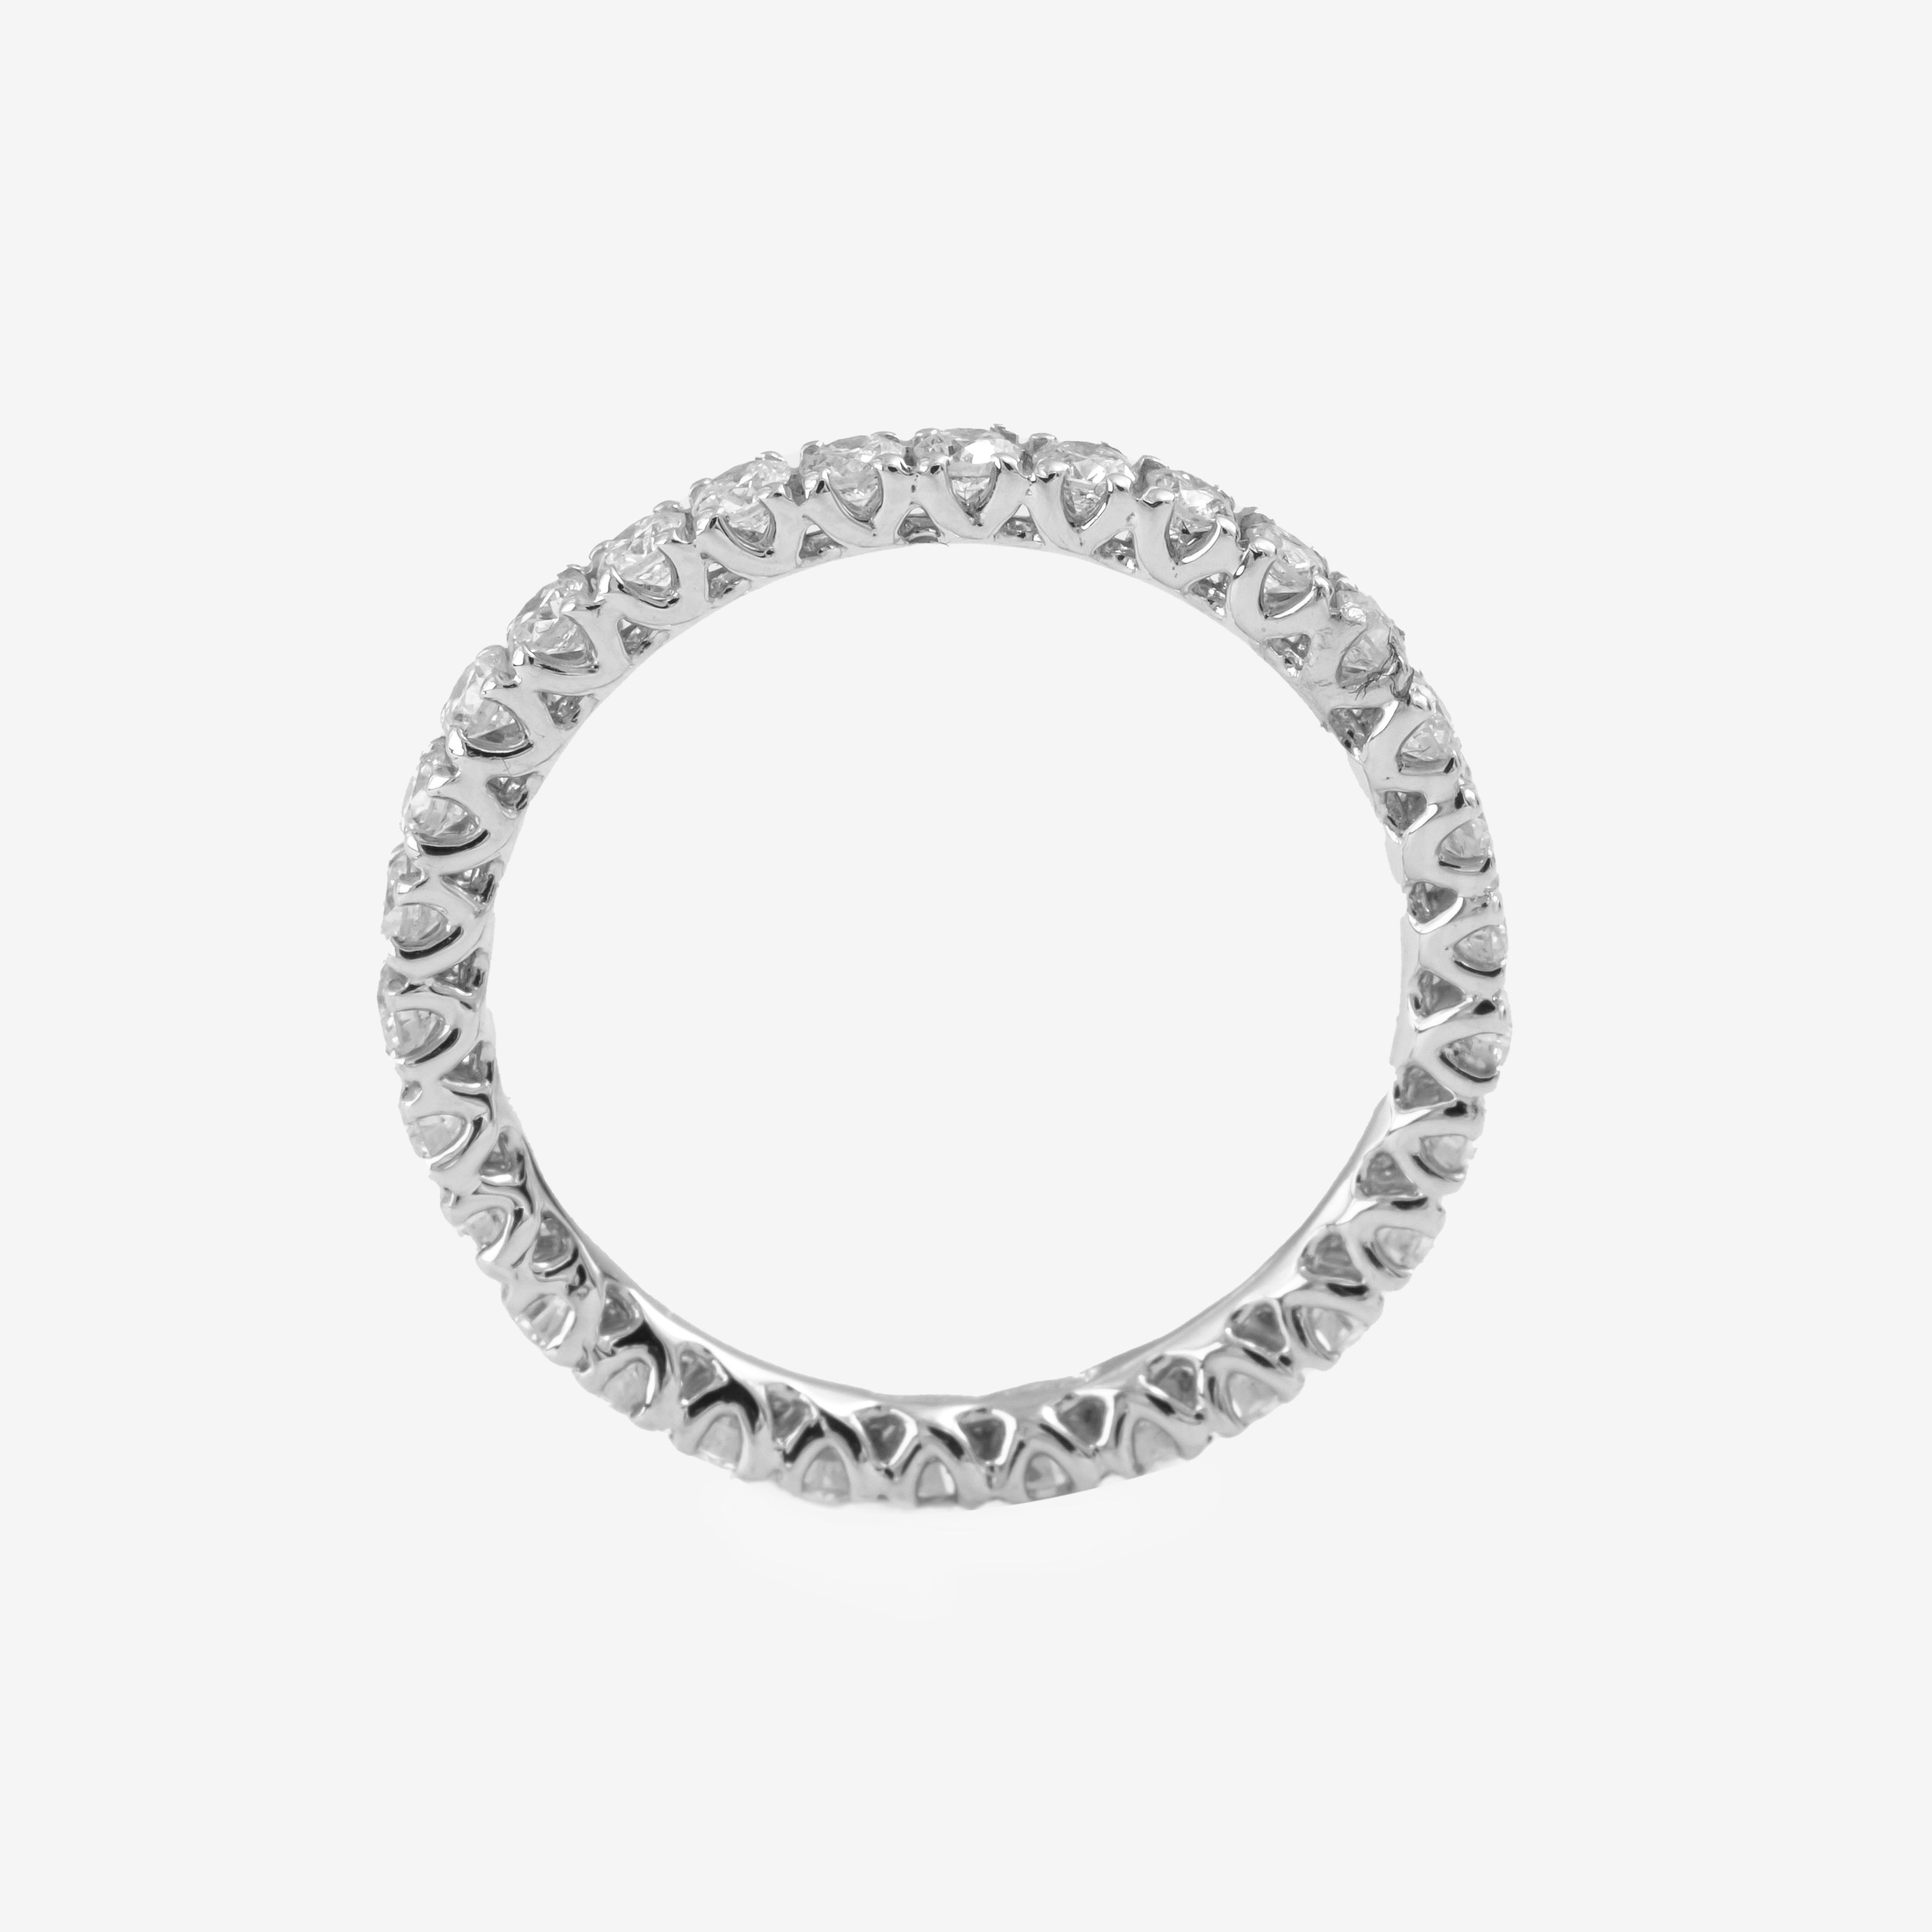 White Gold Eternity Ring with White Diamonds 0.40ct